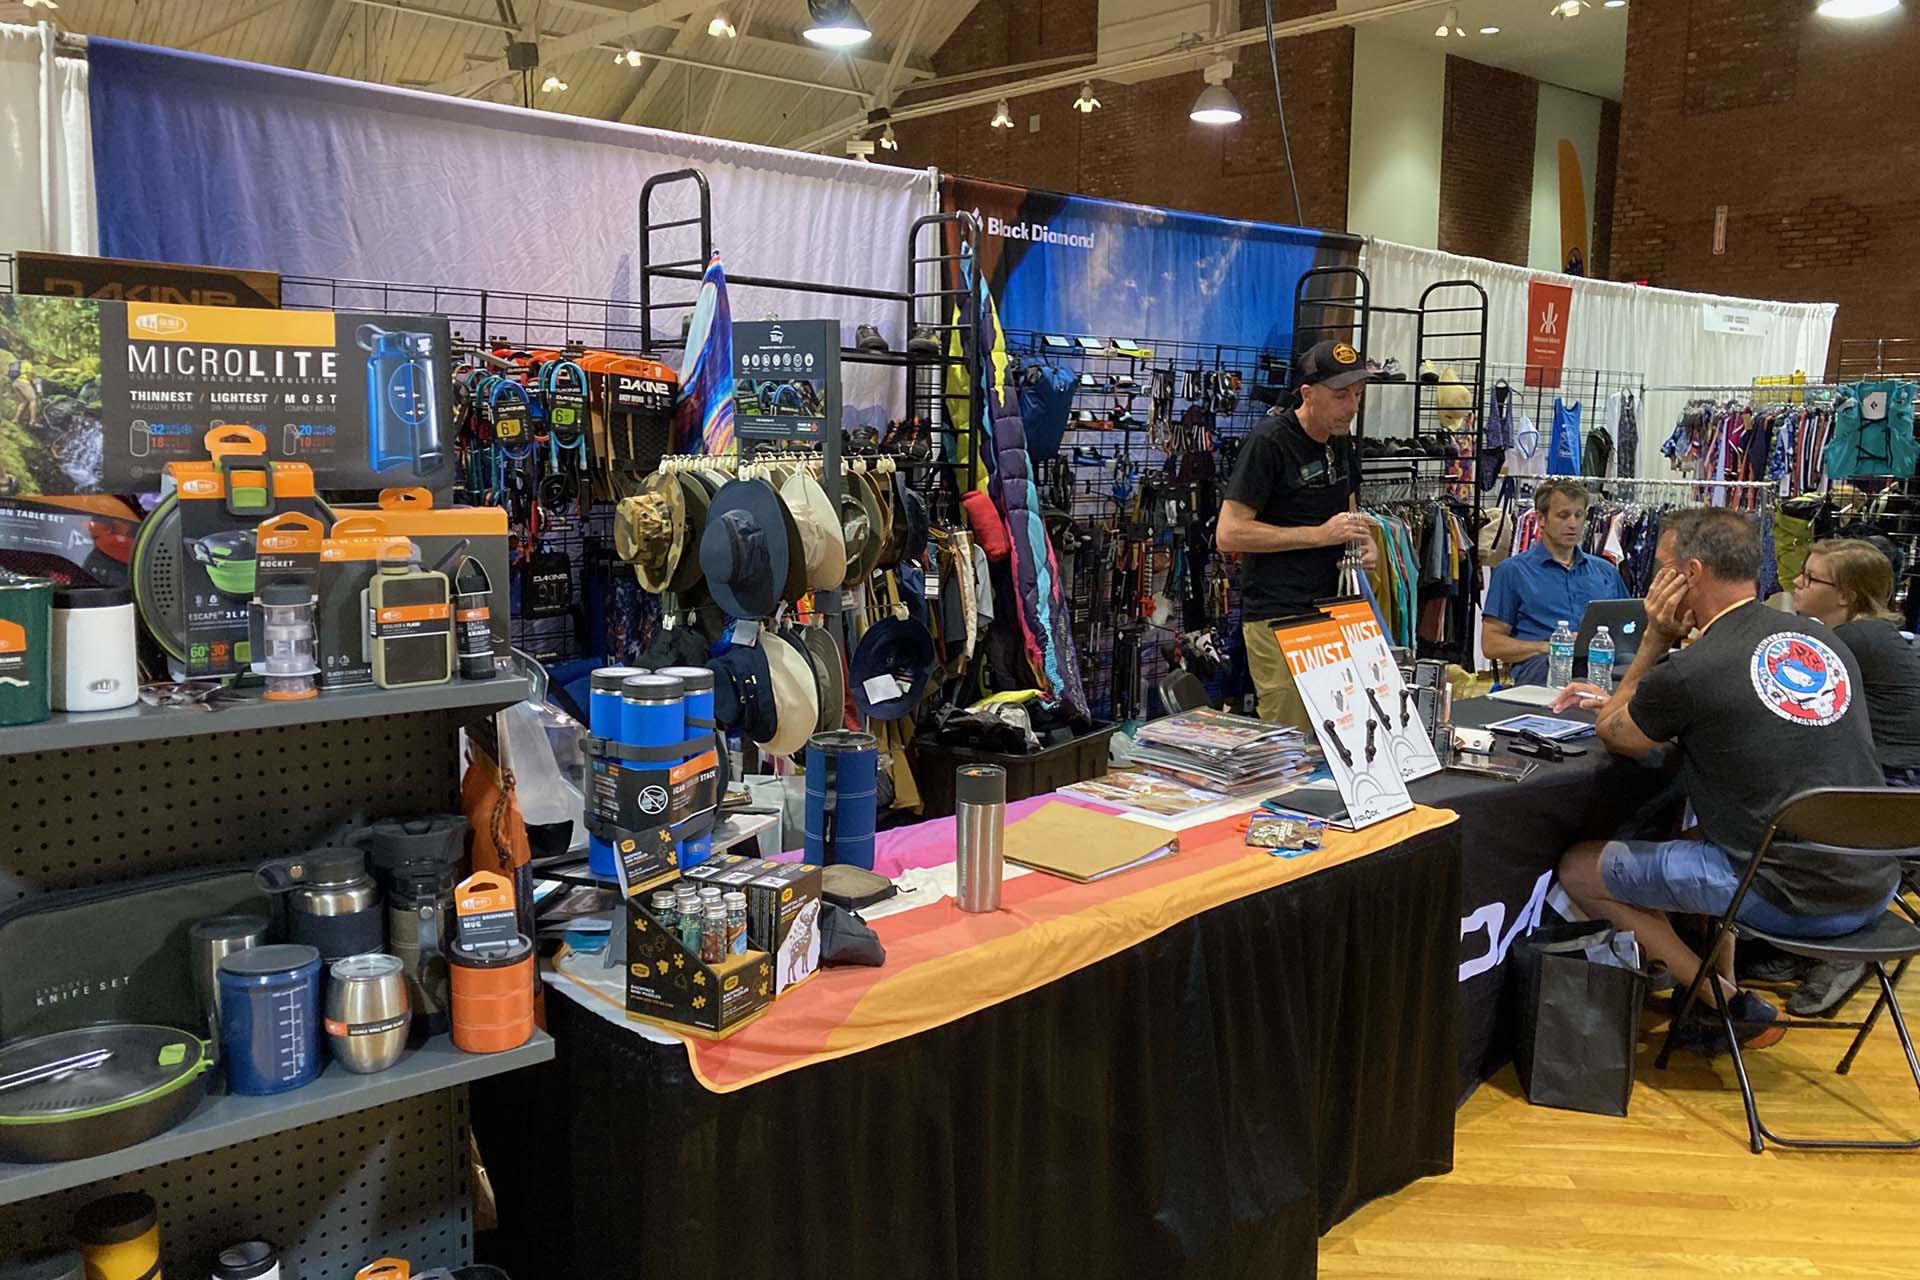 Booth filled with outdoor camping gear